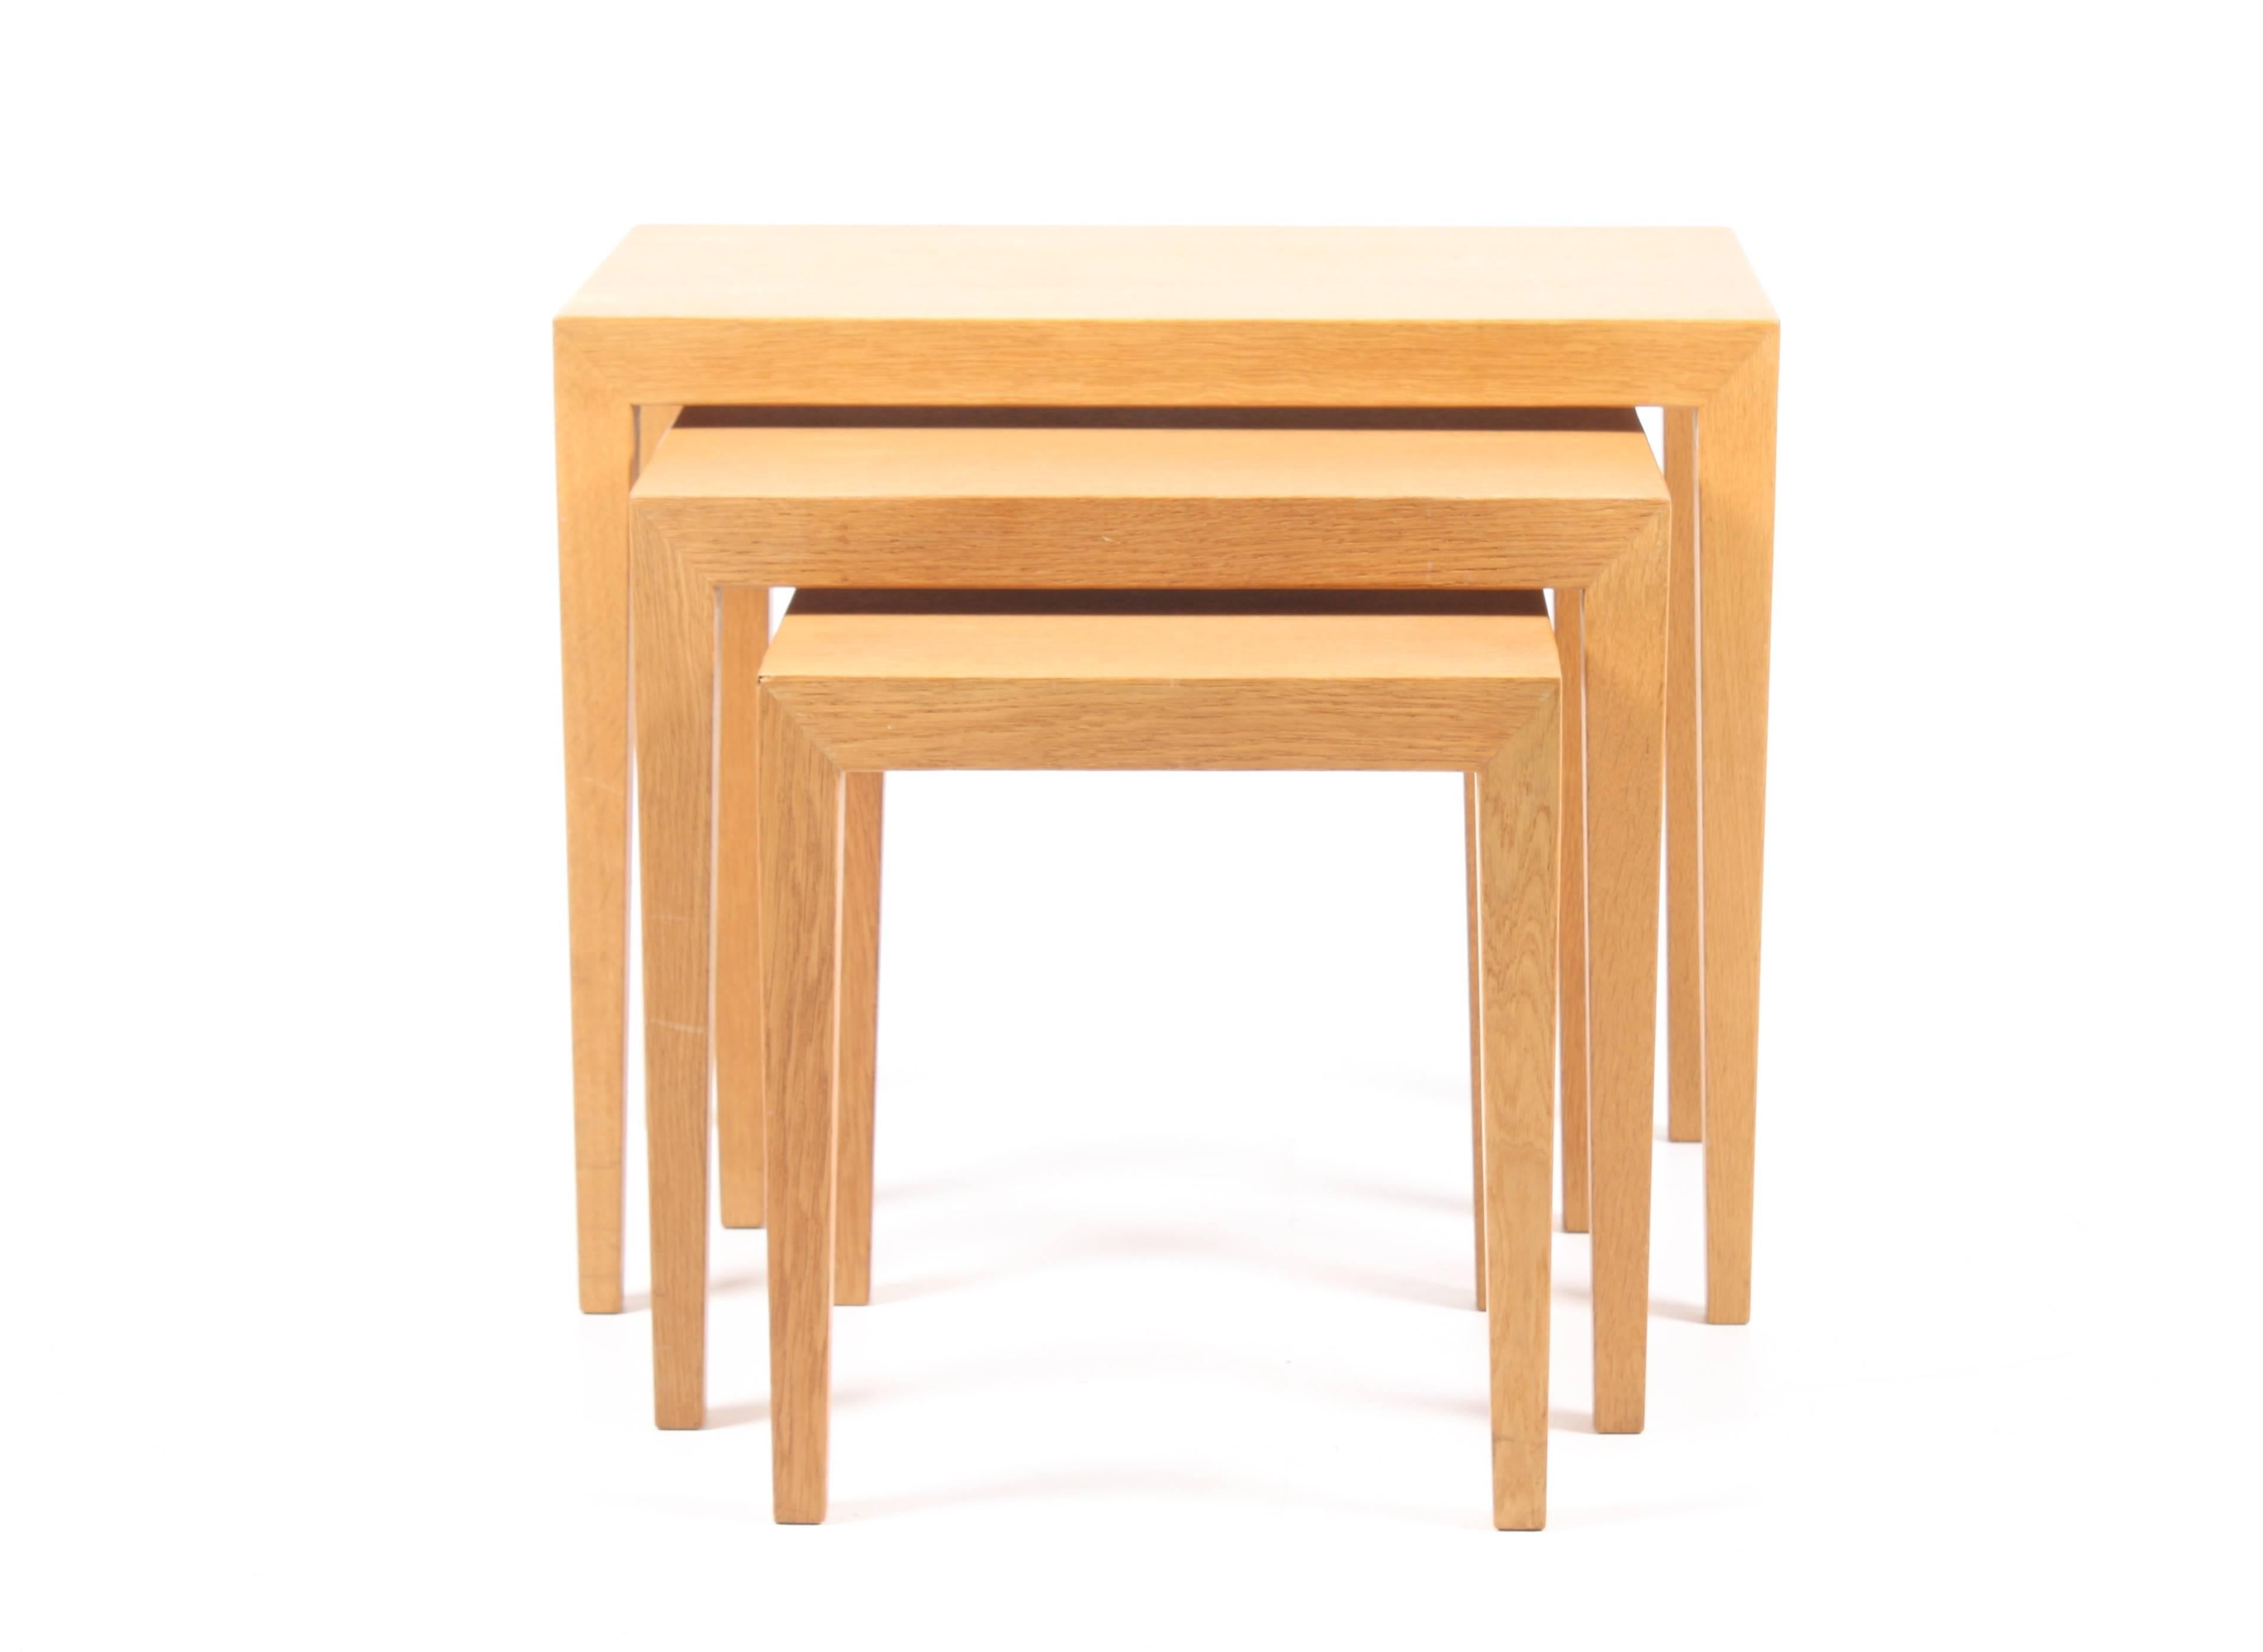 Set of nesting tables in well patinated wax finished Scandinavian oak designed by Maa. Severin Hansen Jr. for Haslev Furniture in 1958. Great condition.